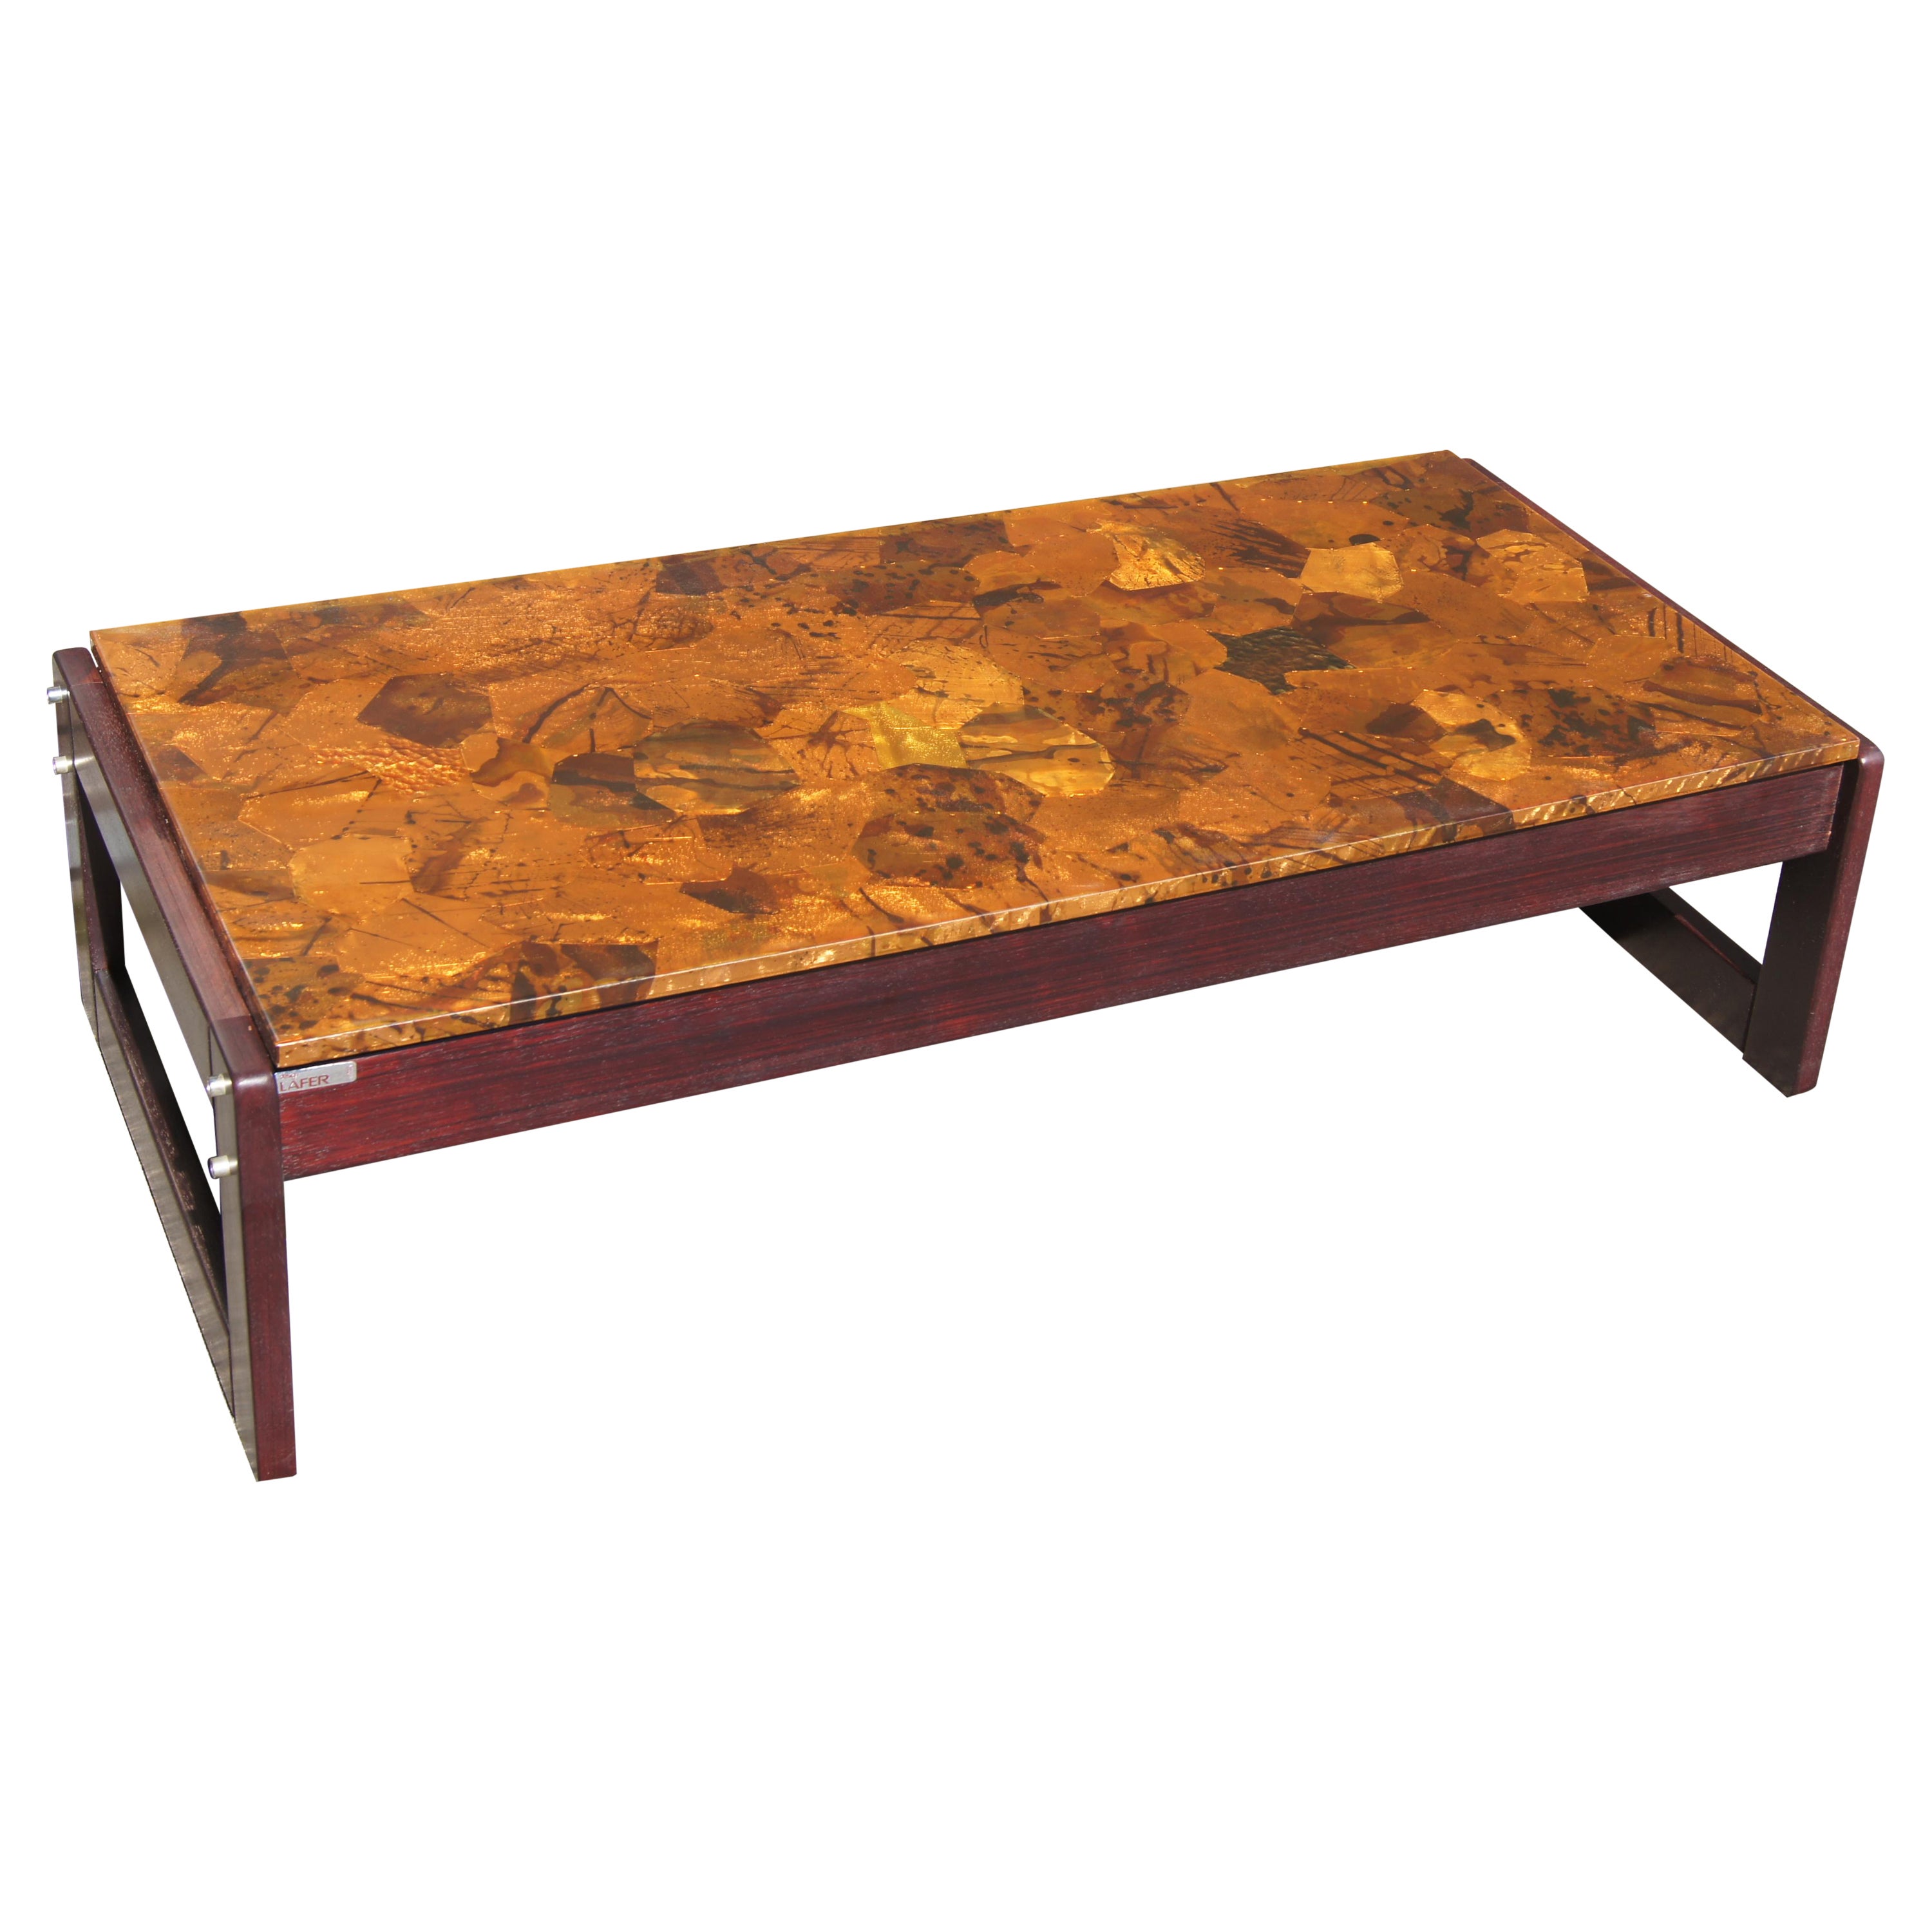 Rosewood and Patchwork Copper Coffee Table by Percival Lafer